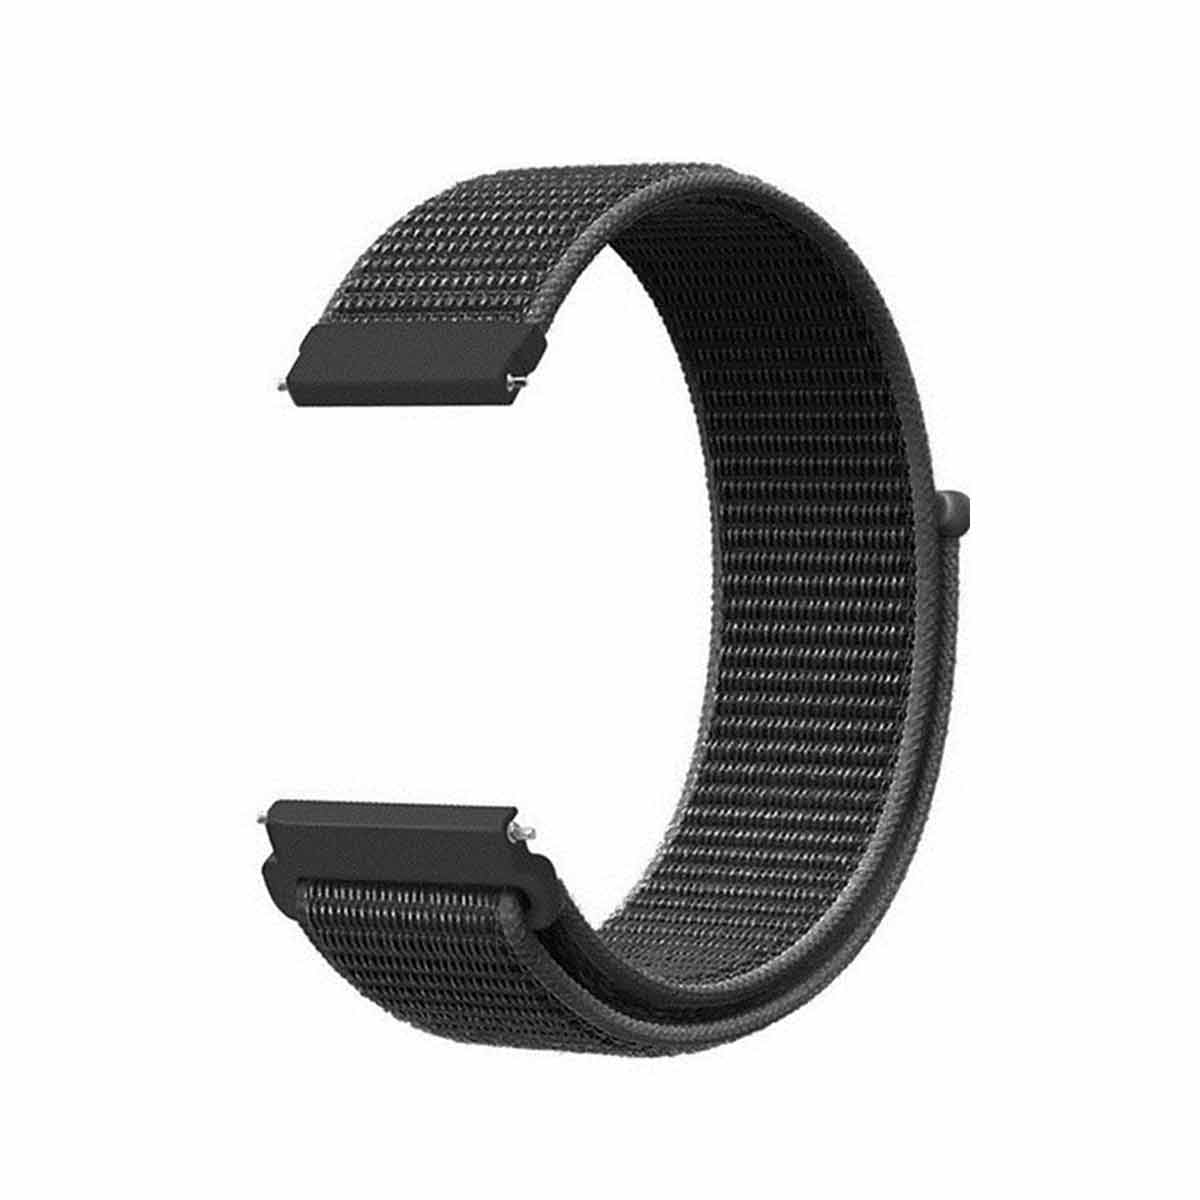 Sports Loop Fitbit Versa & Versa 2 Band Replacement Strap Grey and Grey  